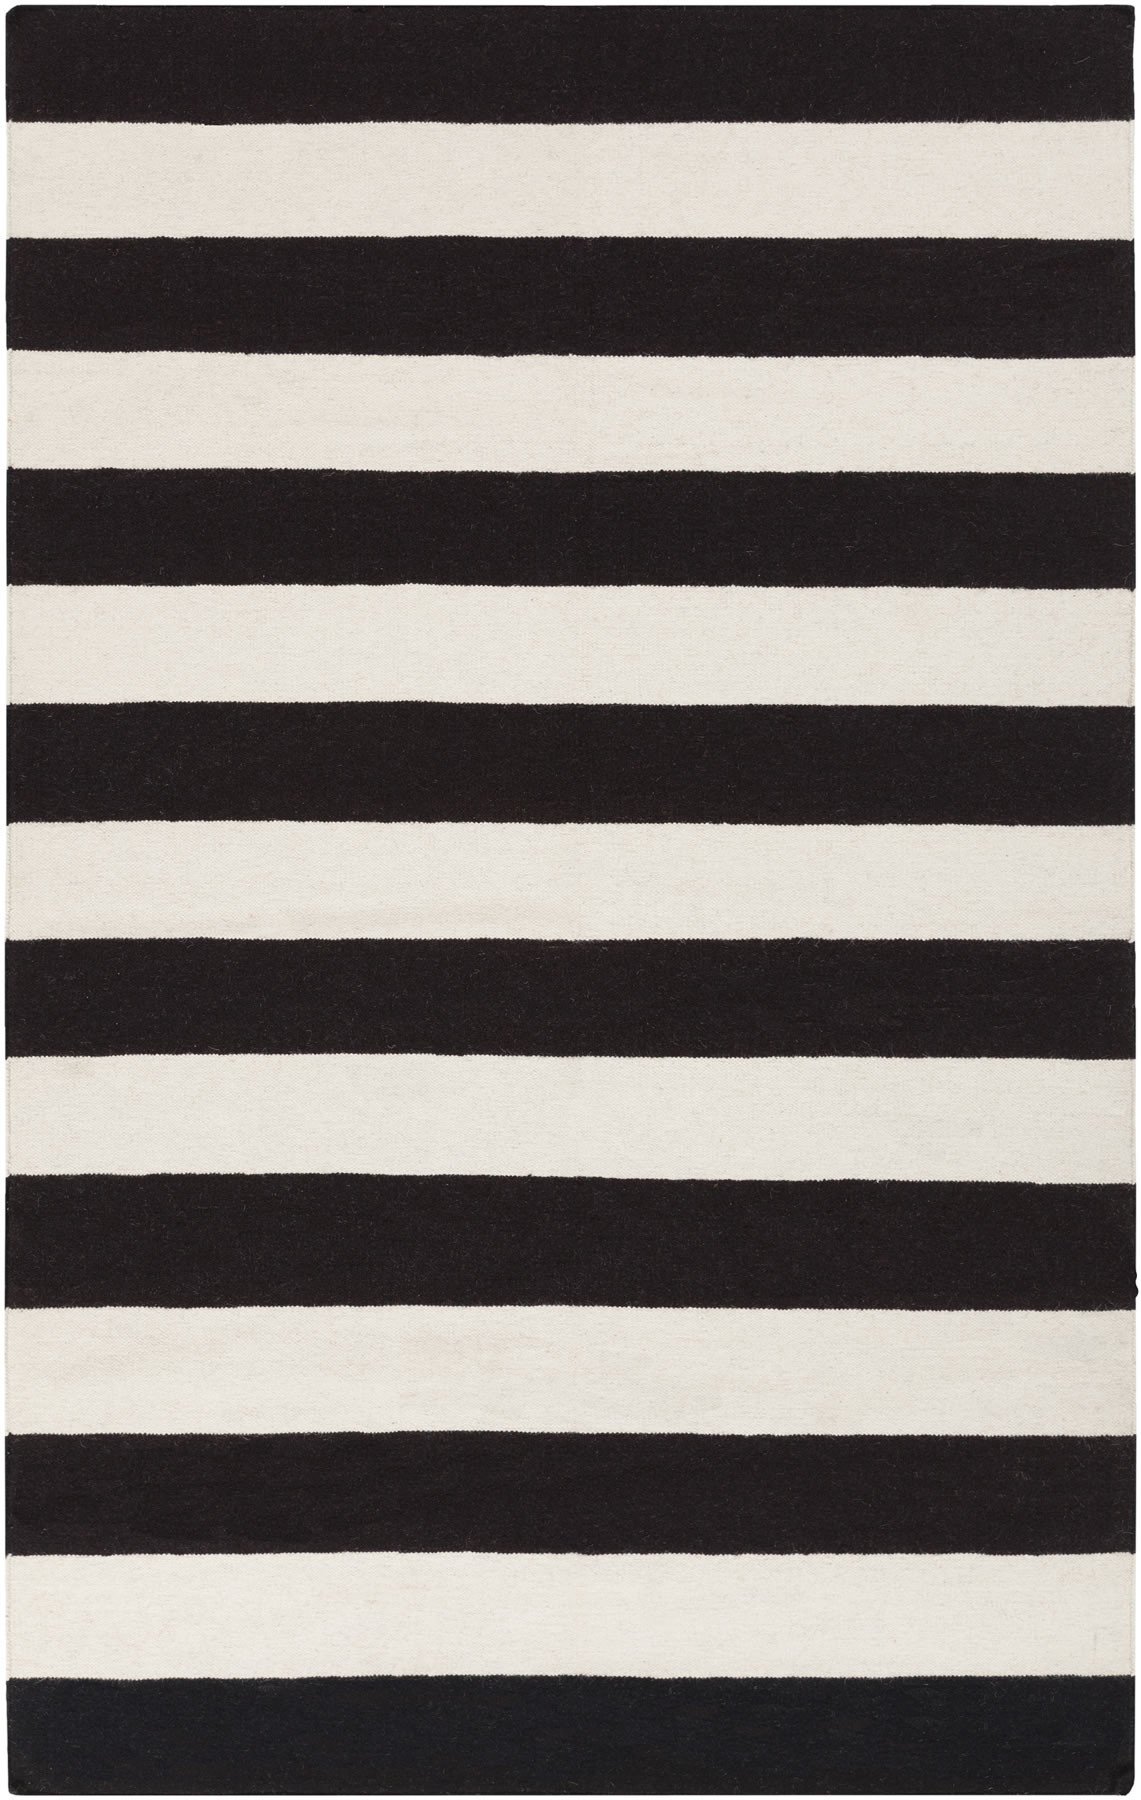 Black and white area rugs frontier collection 100% wool area rug in jet black and white design by CYCTNPA